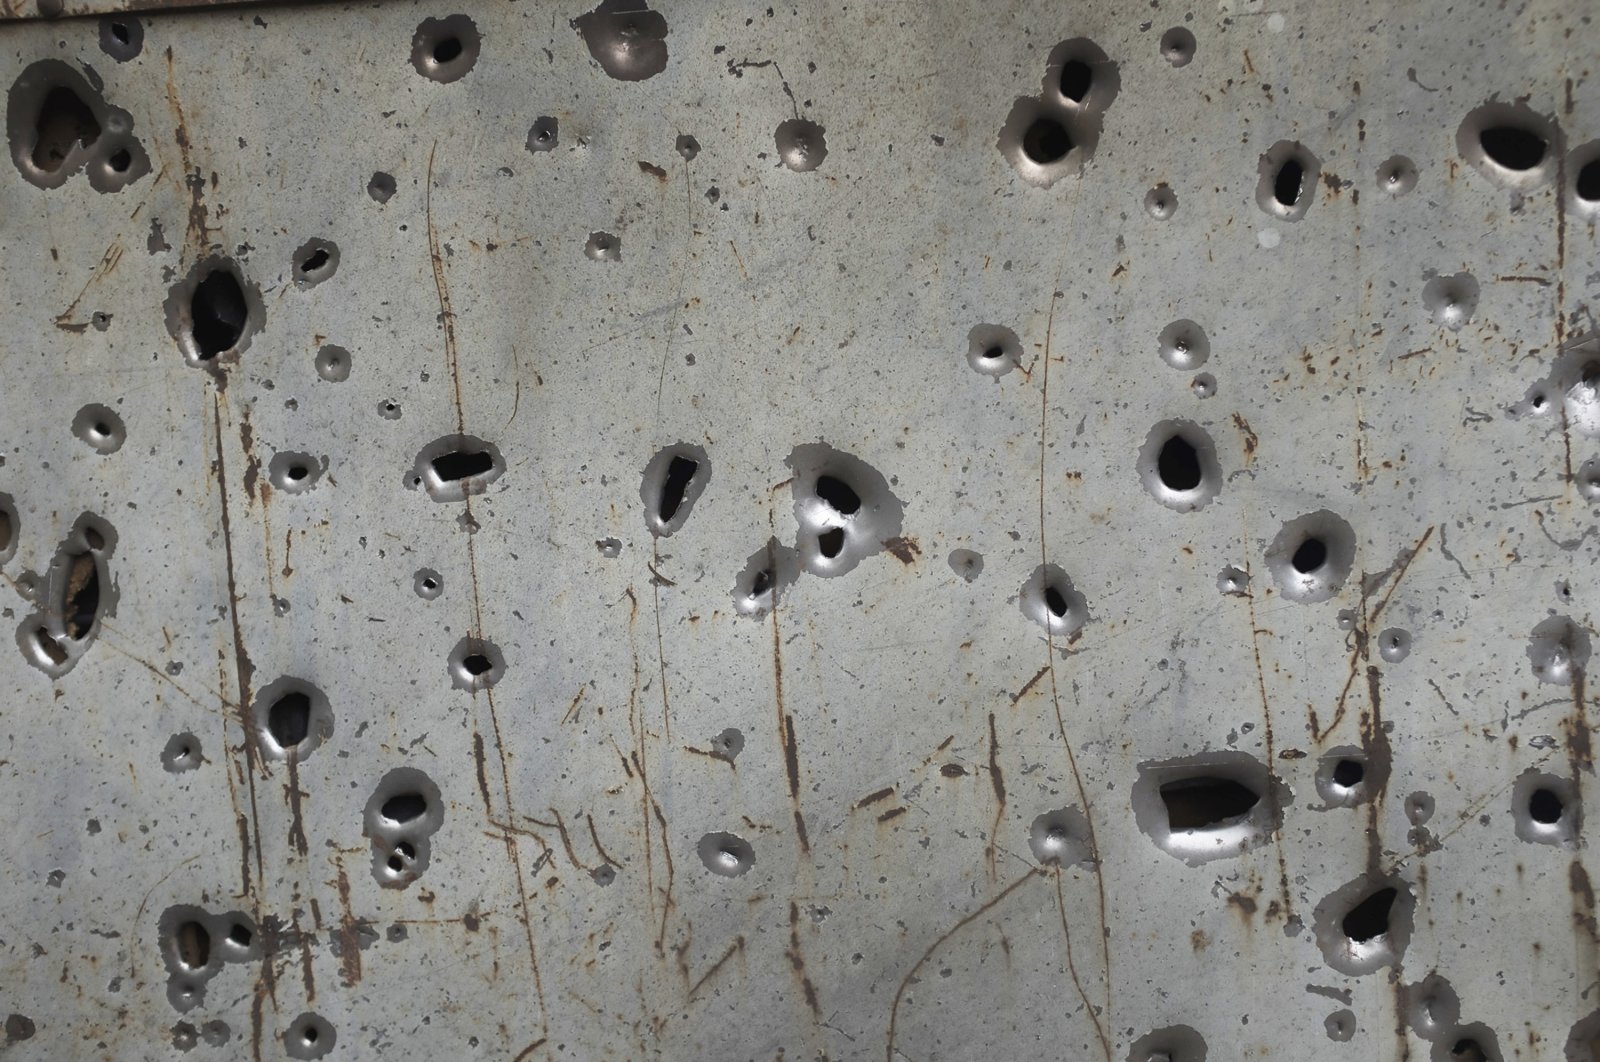 Shrapnel holes are seen in a fence in the Hadrut province of Armenian-occupied Nagorno-Karabakh, Azerbaijan, Oct. 1, 2020. (AP Photo)